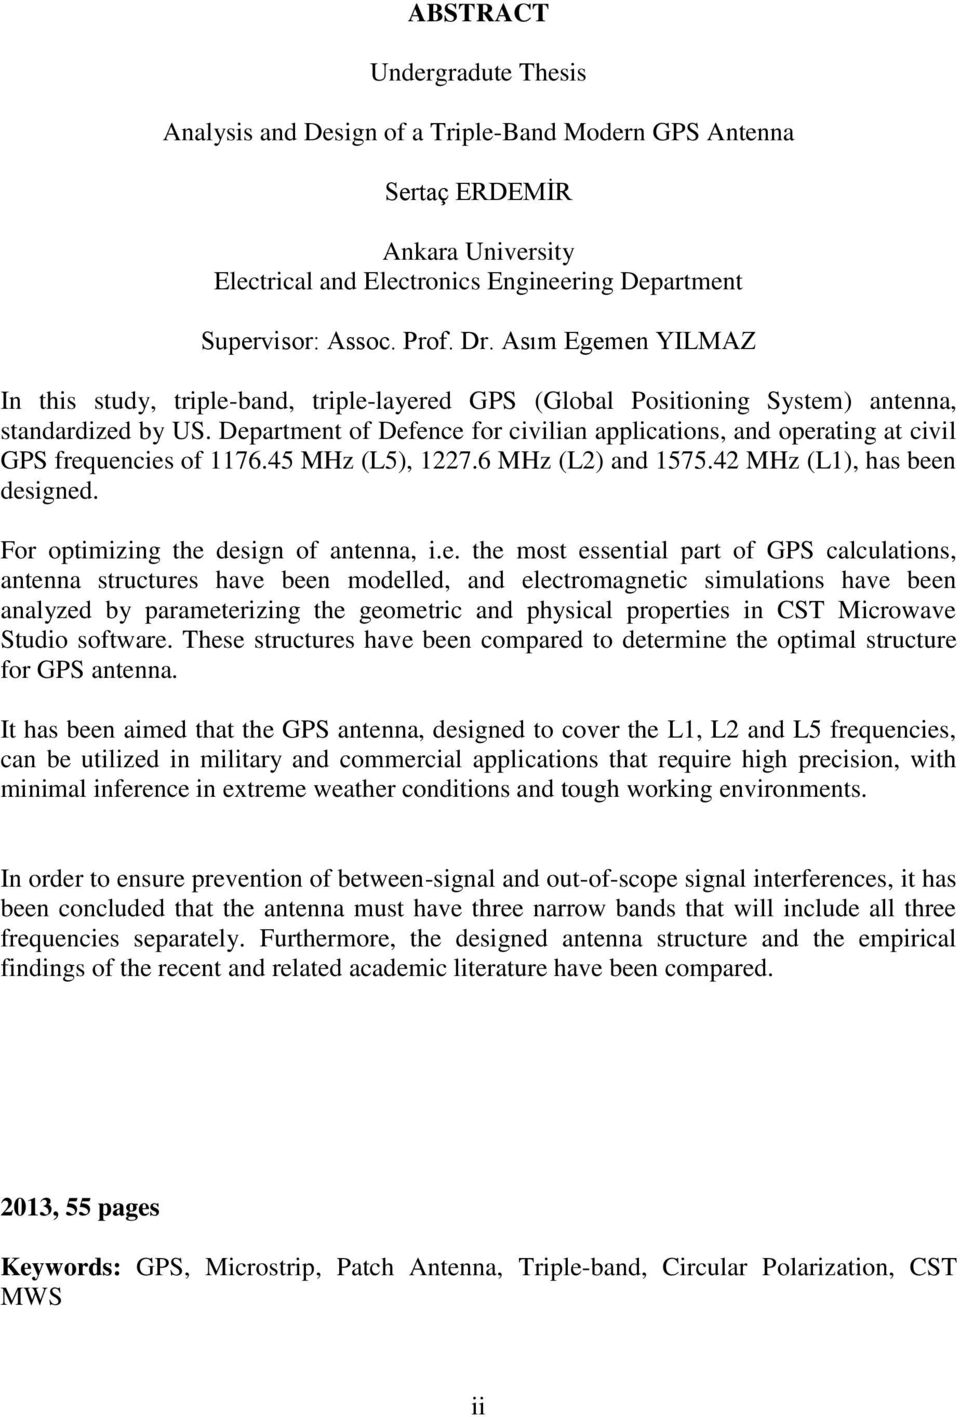 Department of Defence for civilian applications, and operating at civil GPS frequencies of 1176.45 MHz (L5), 1227.6 MHz (L2) and 1575.42 MHz (L1), has been designed.